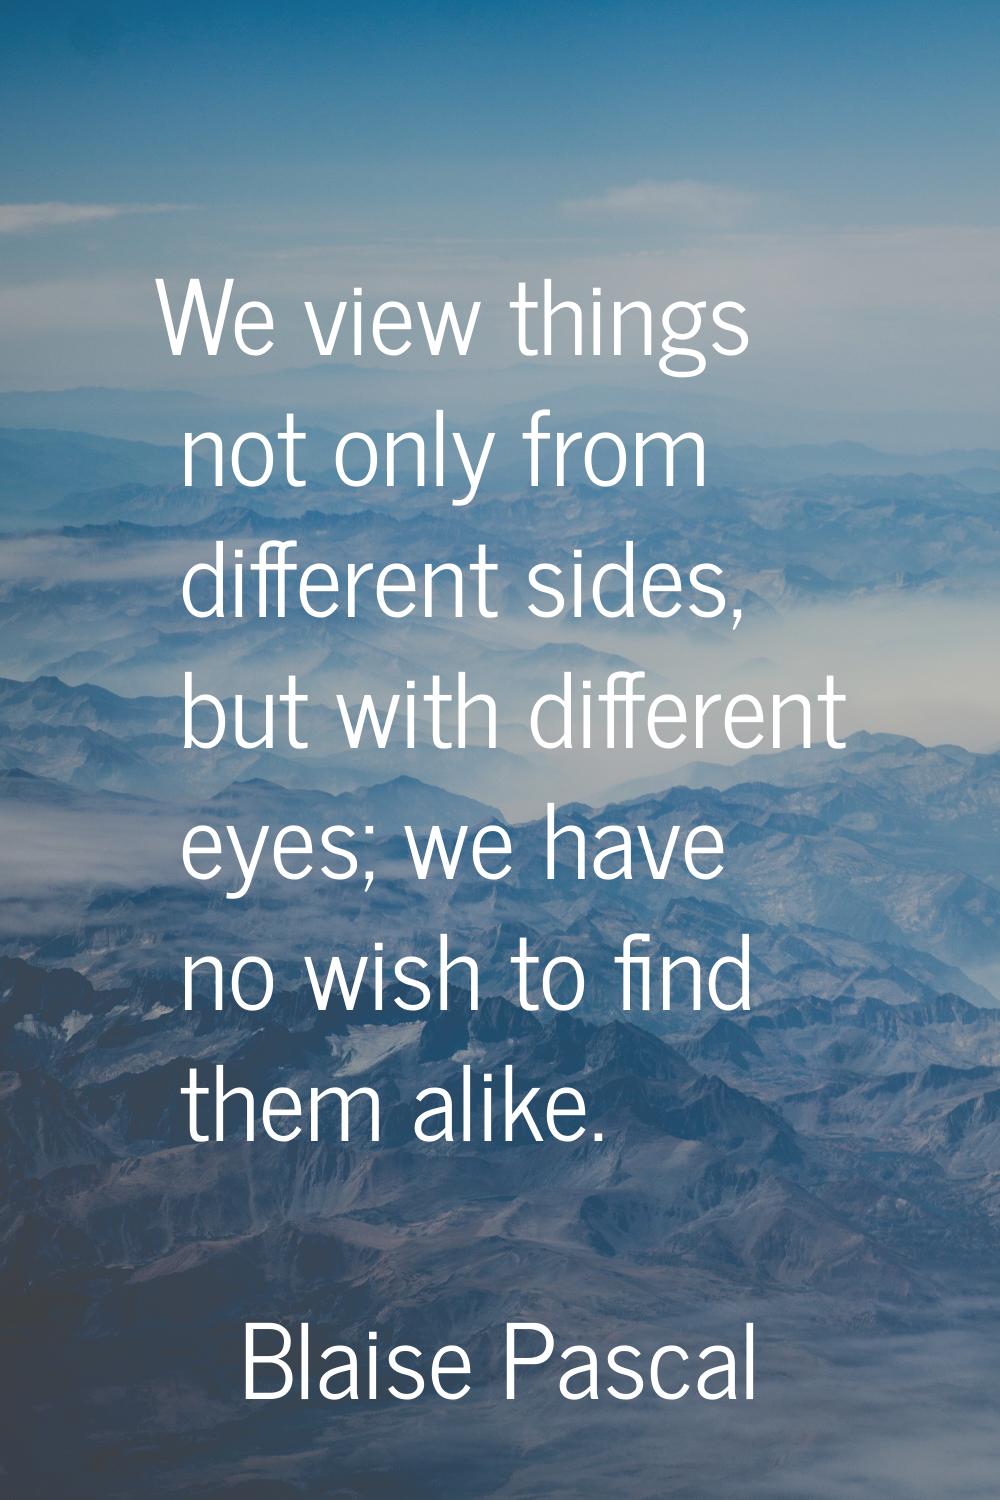 We view things not only from different sides, but with different eyes; we have no wish to find them